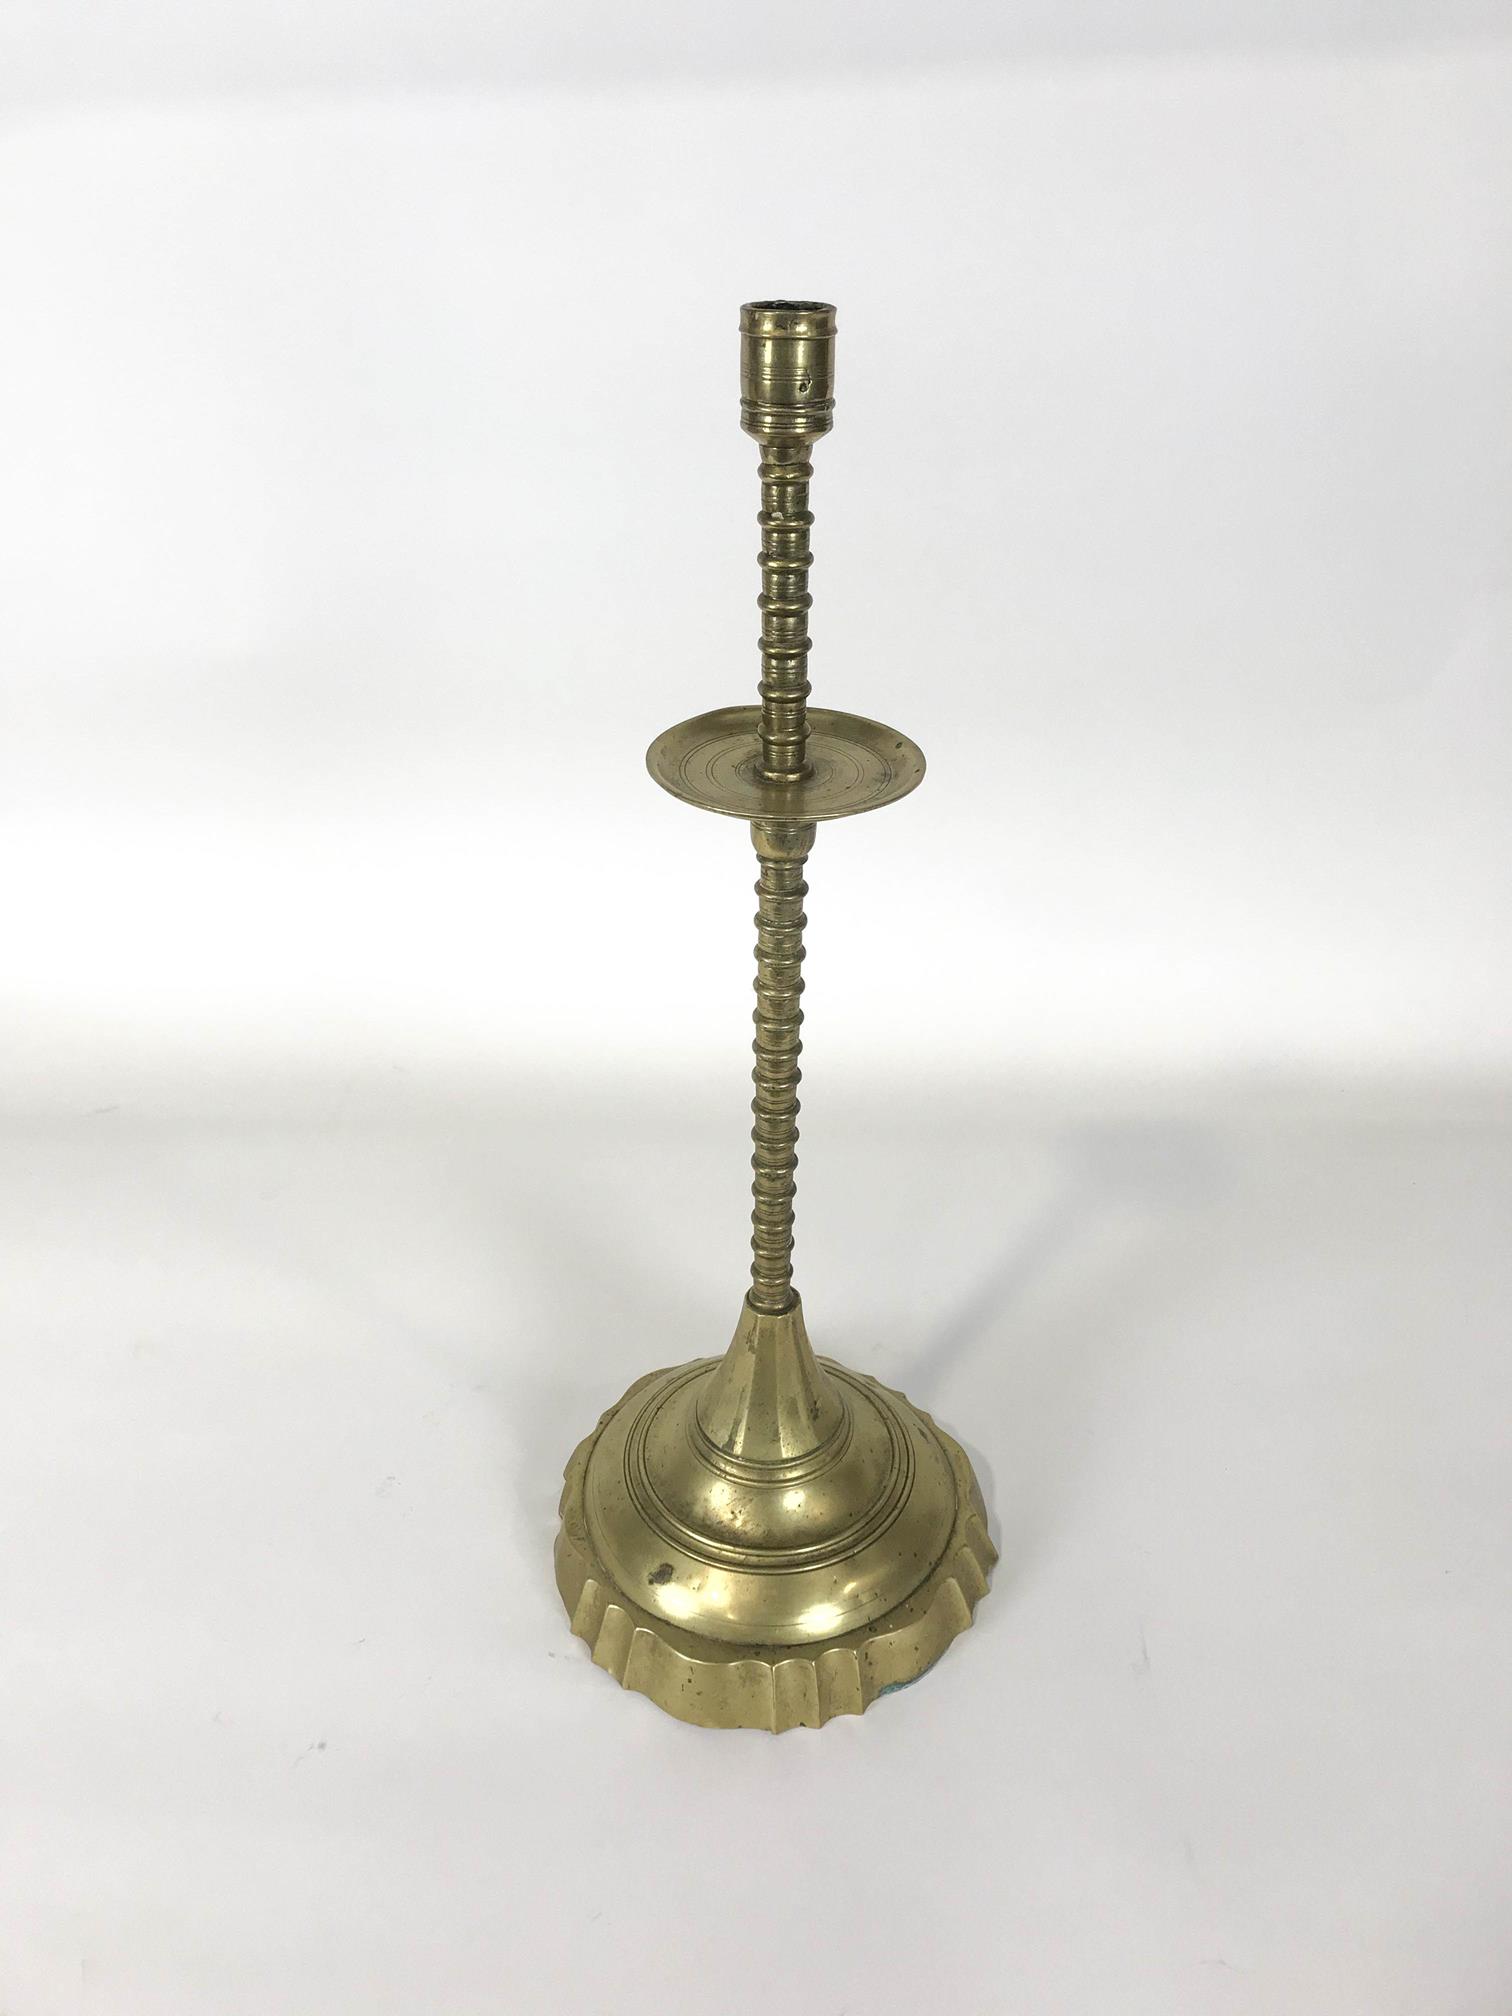 A late 18th/ early 19th century brass candlestick with flared drip pan